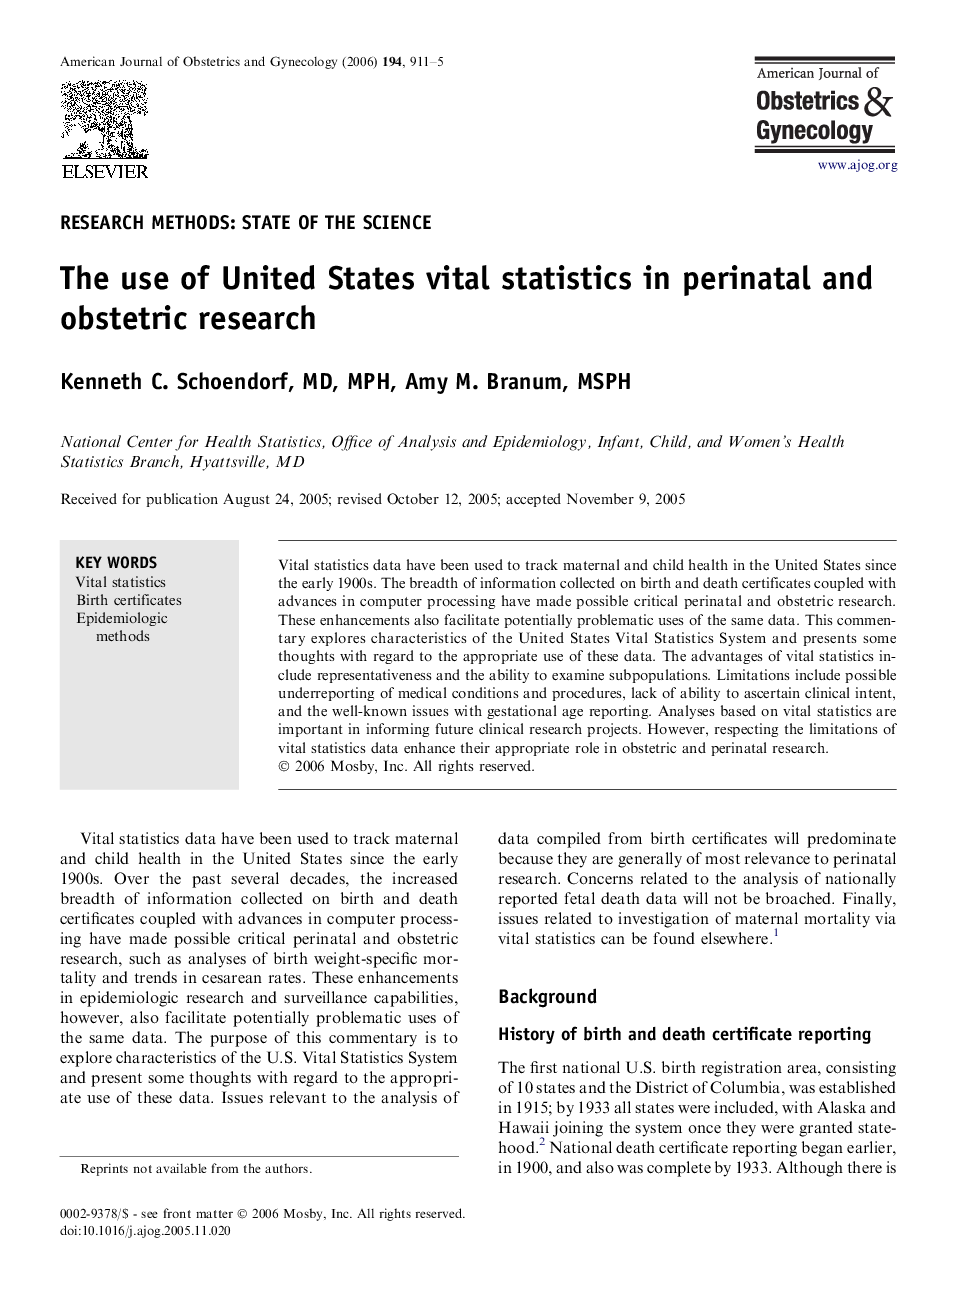 The use of United States vital statistics in perinatal and obstetric research 